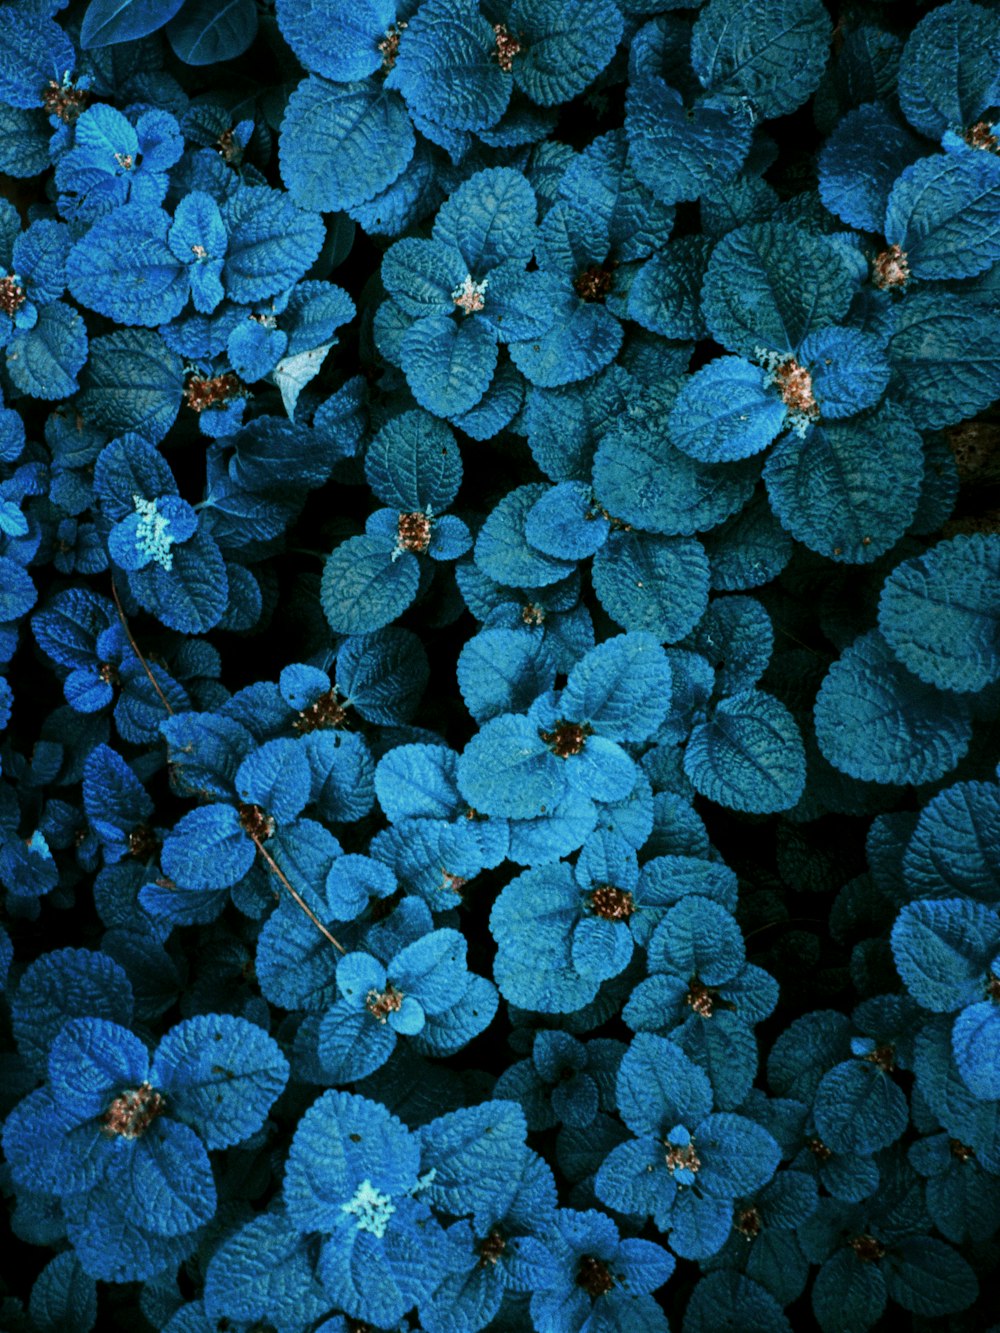 a bunch of blue flowers with green leaves